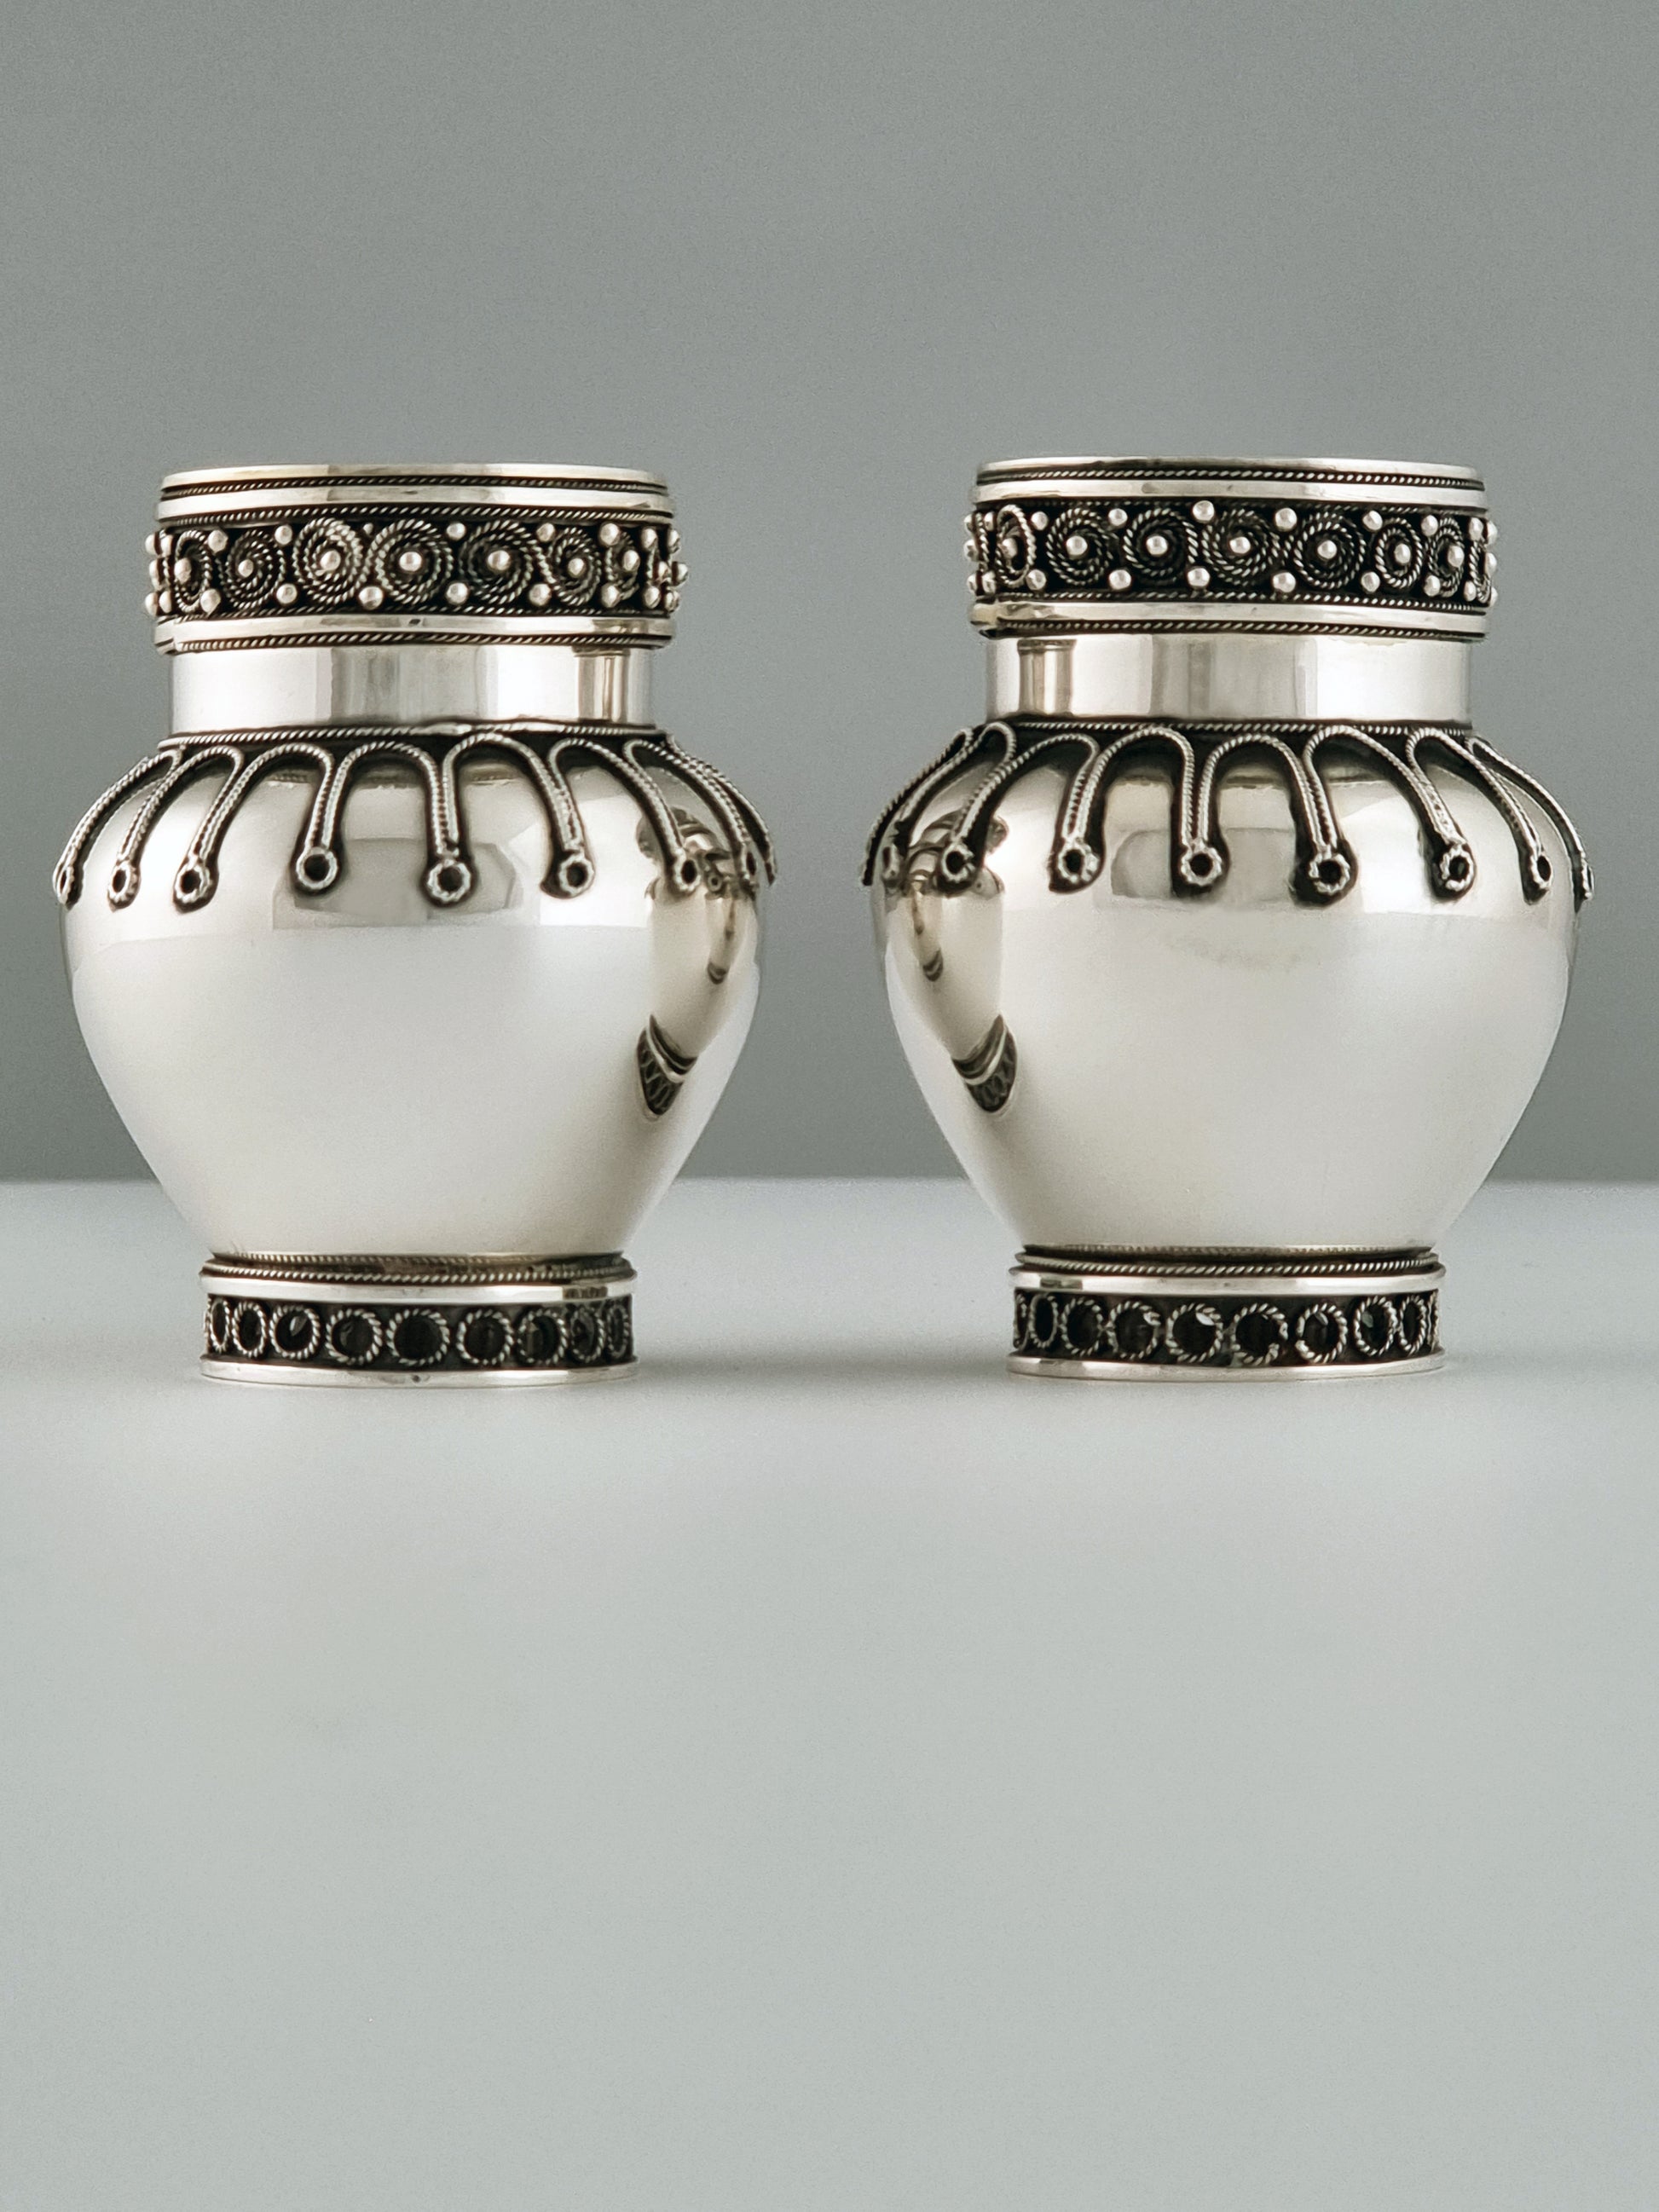 A pair of Yaacov Yemini's candlesticks smiling at each other.